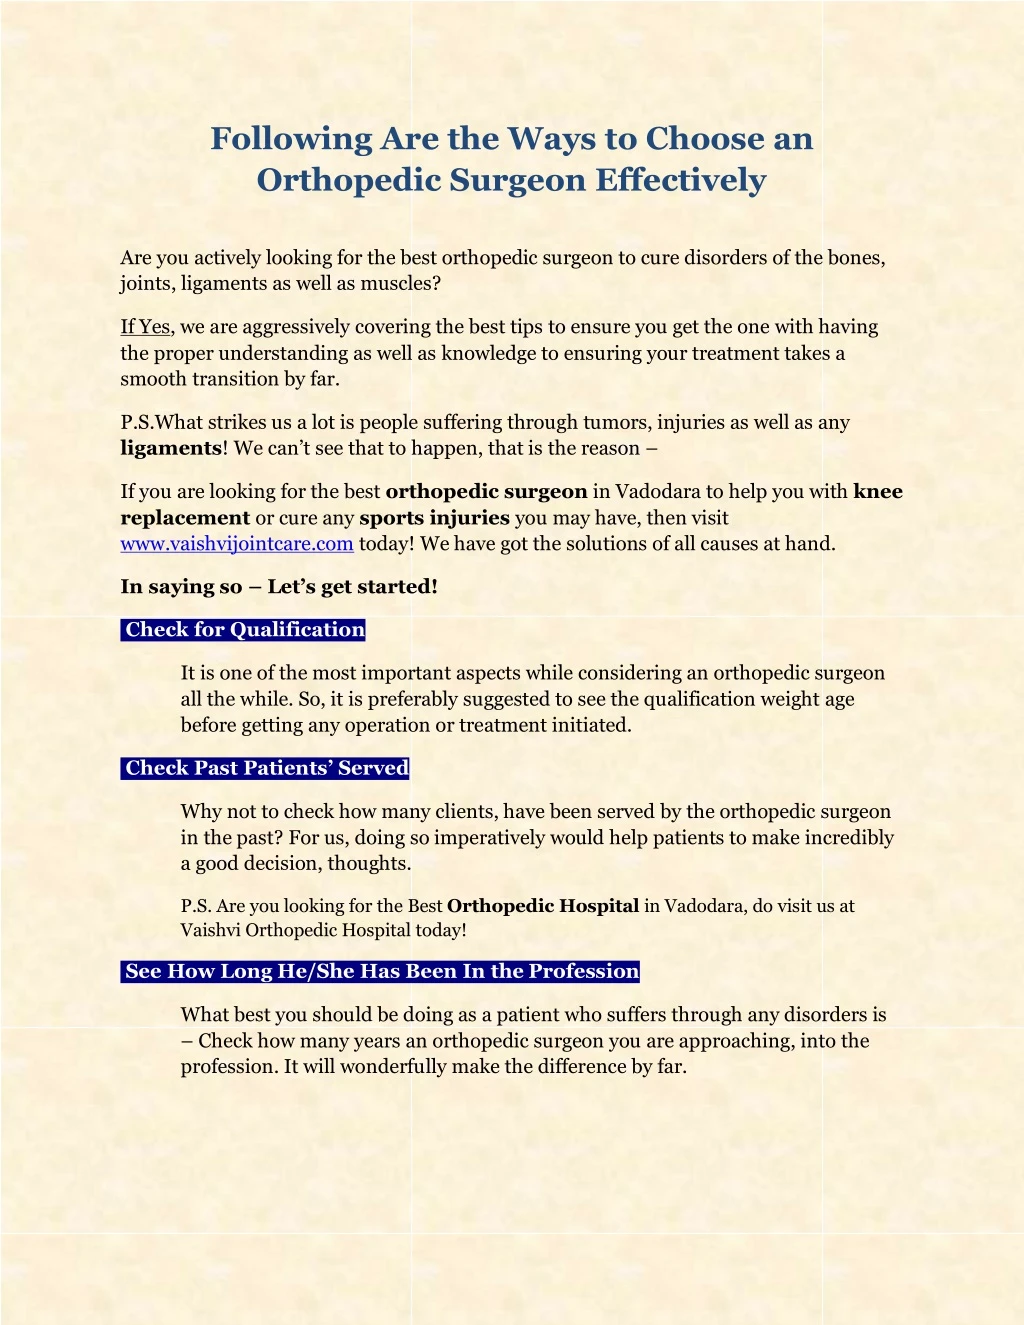 following are the ways to choose an orthopedic